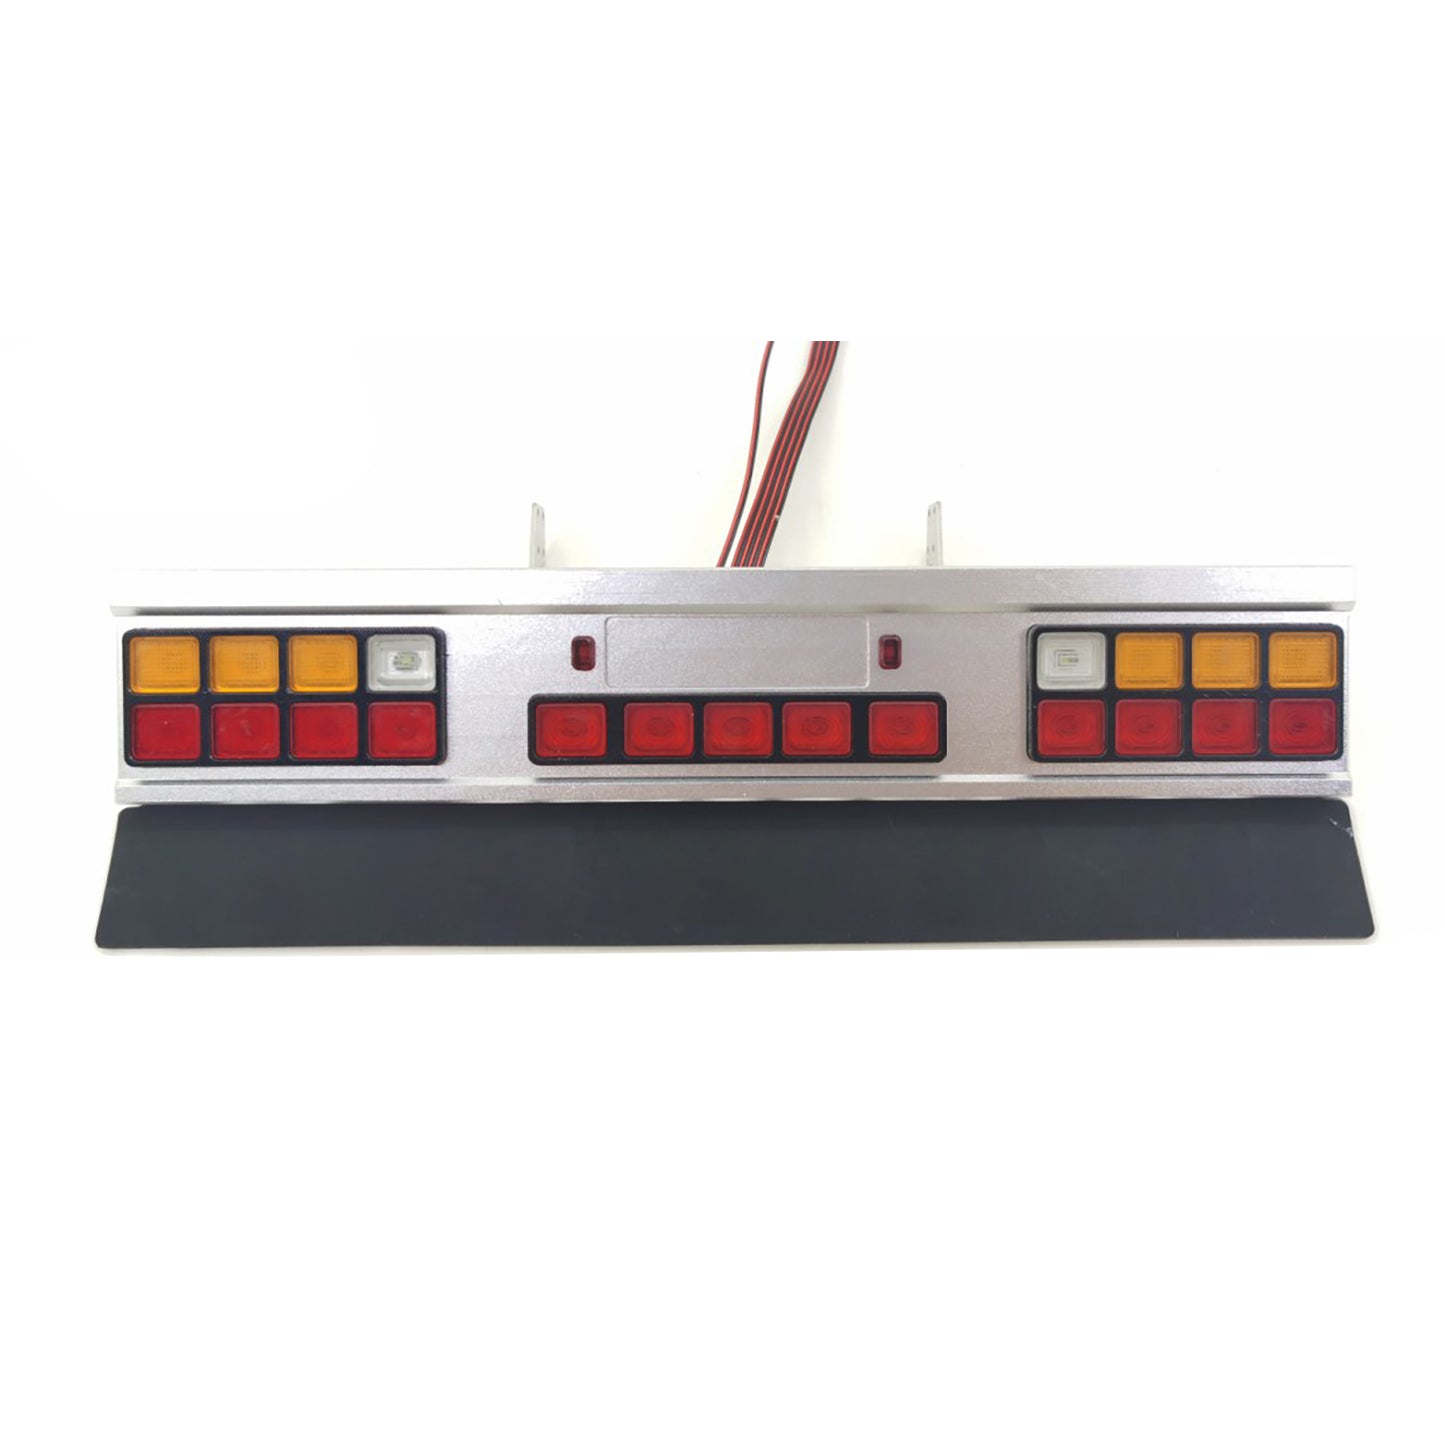 Degree CNC Tail Beam Led Taillight DIY for 1/14 Tamiya RC Tractor Truck Radio Control Car Hobby Model DIY Accessory Parts